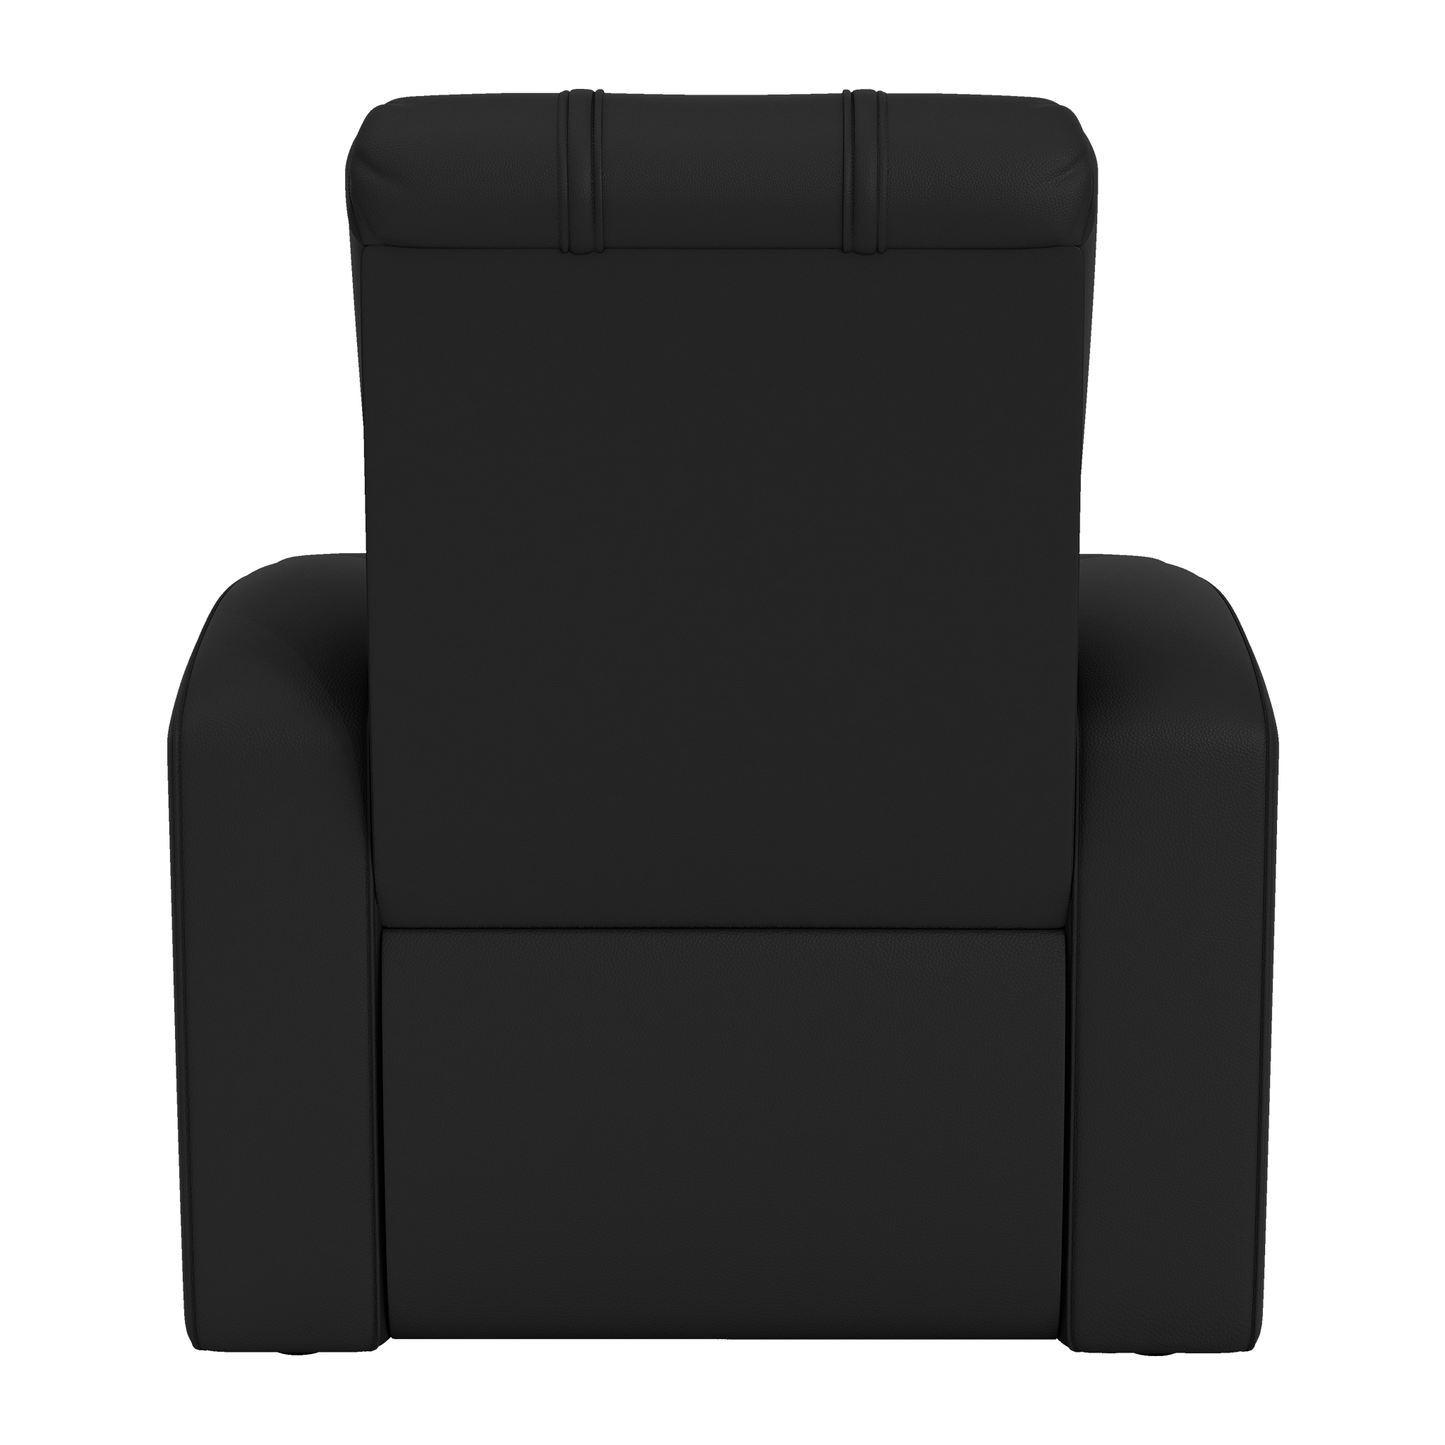 Relax Home Theater Recliner with Chicago Cubs Secondary